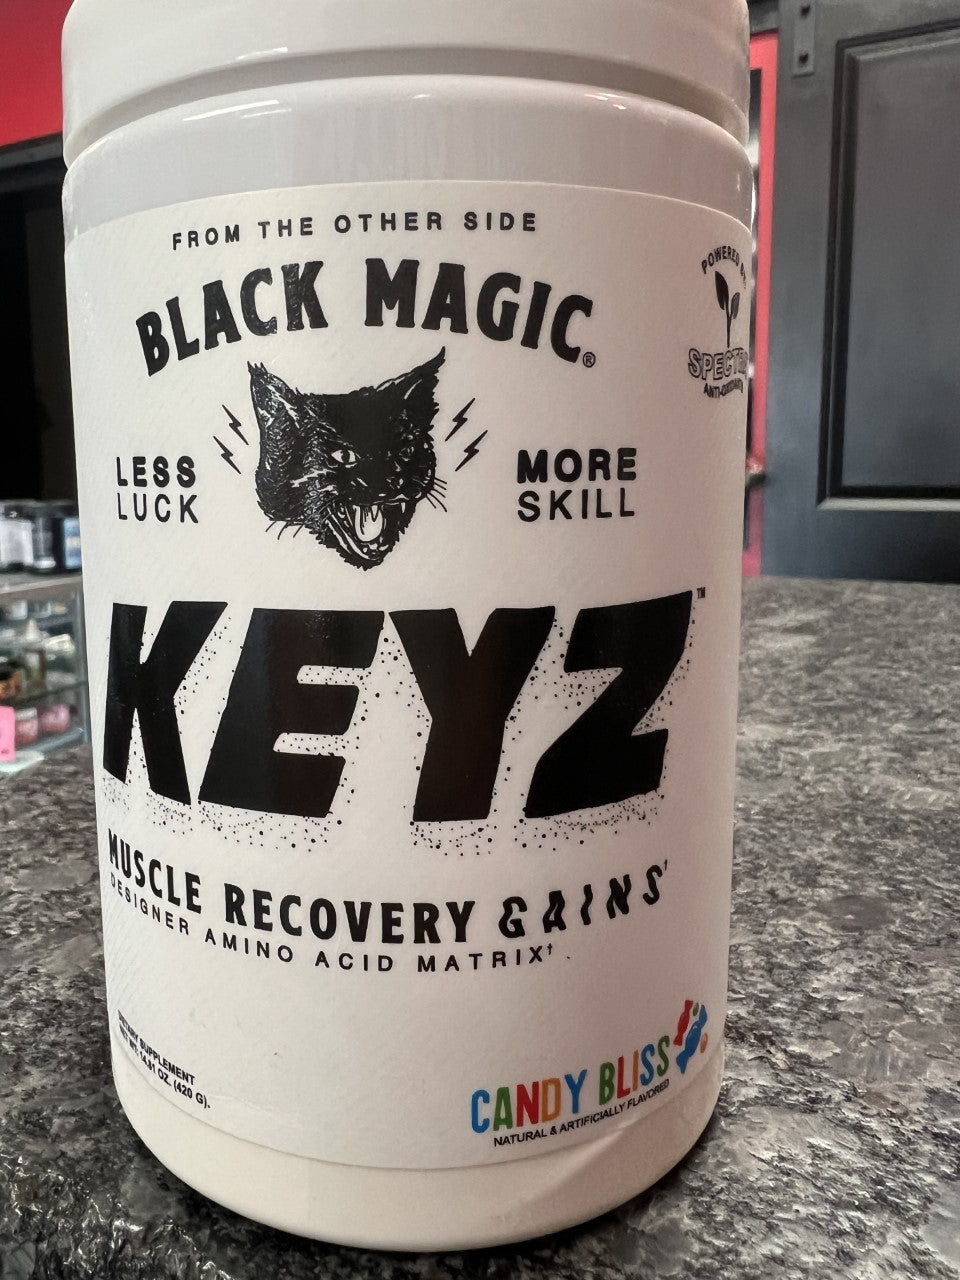 Keys BCAA,S MUscle Recovery & Gains